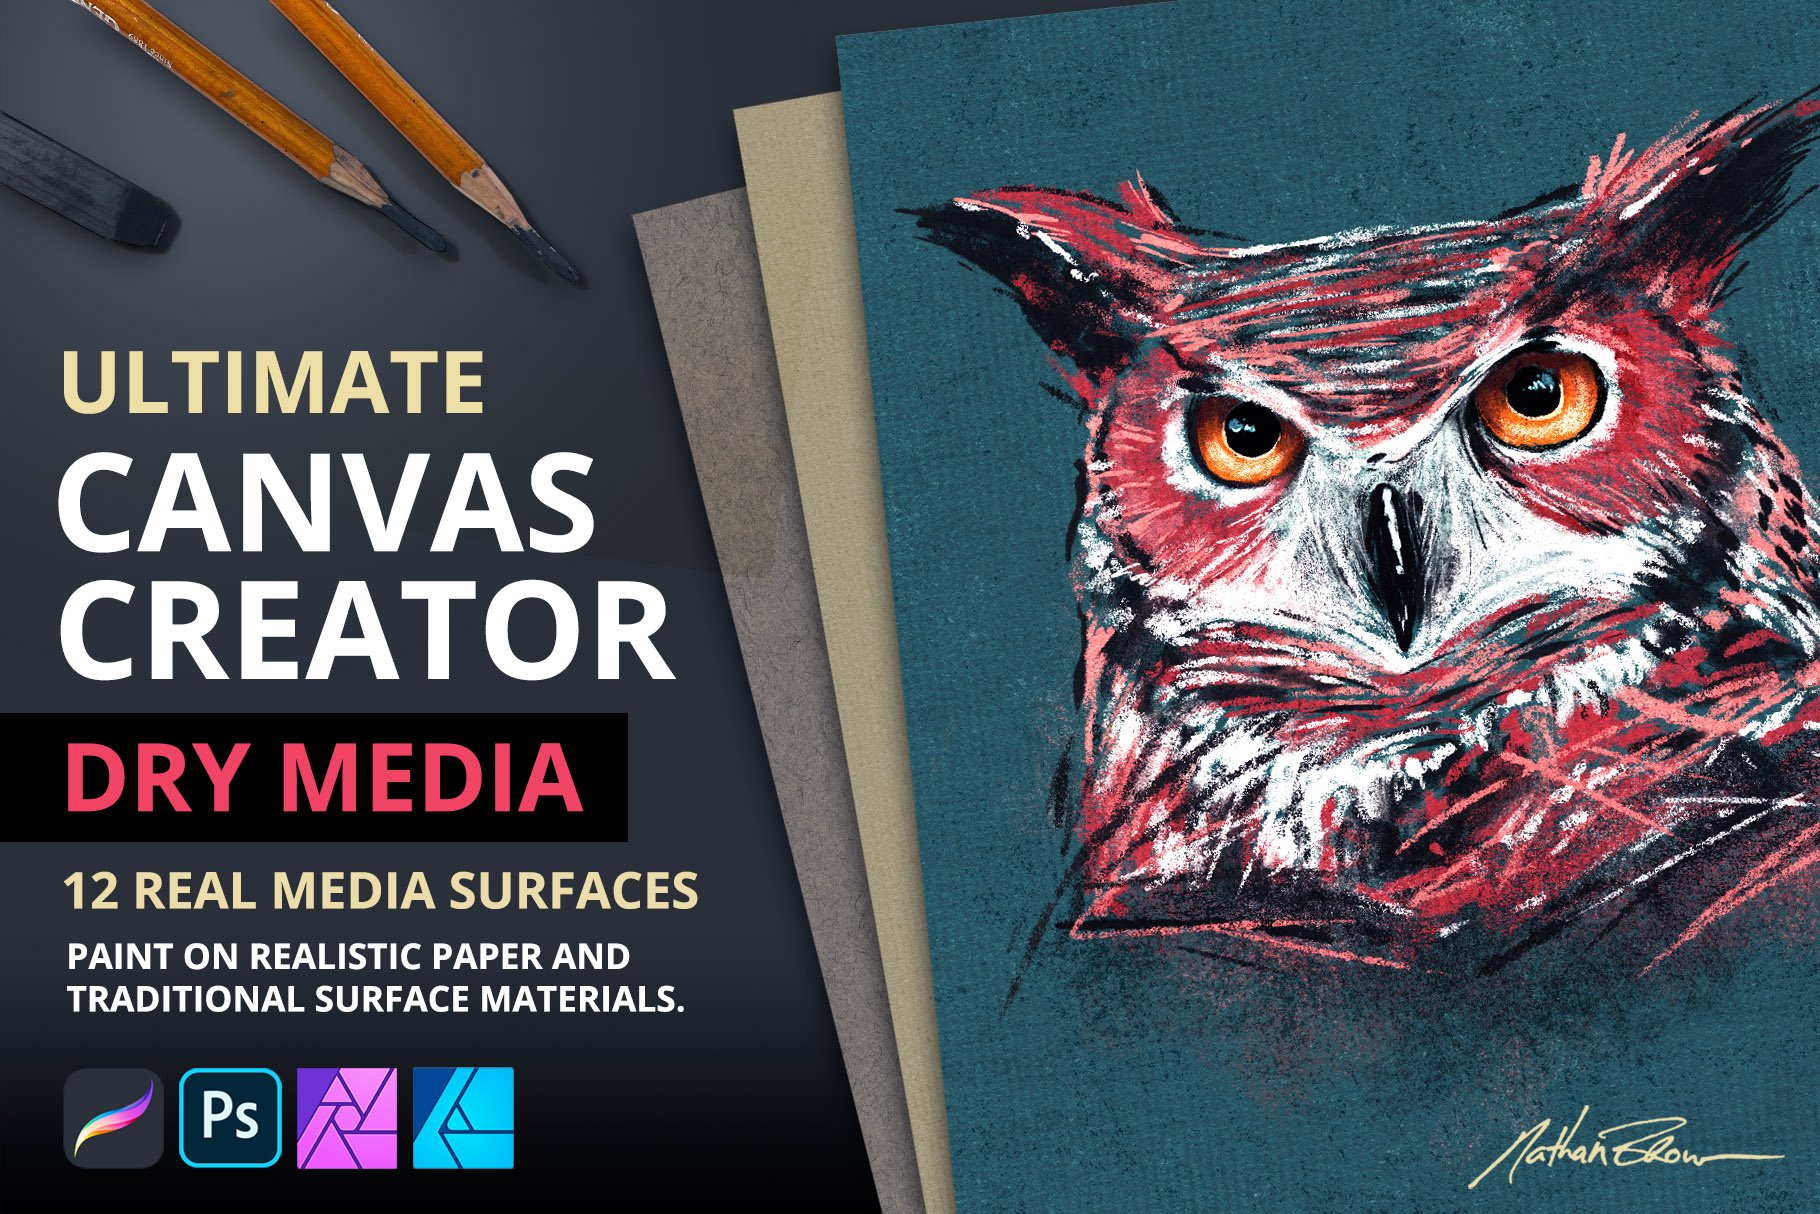 The Ultimate Canvas Creator - Dry Media